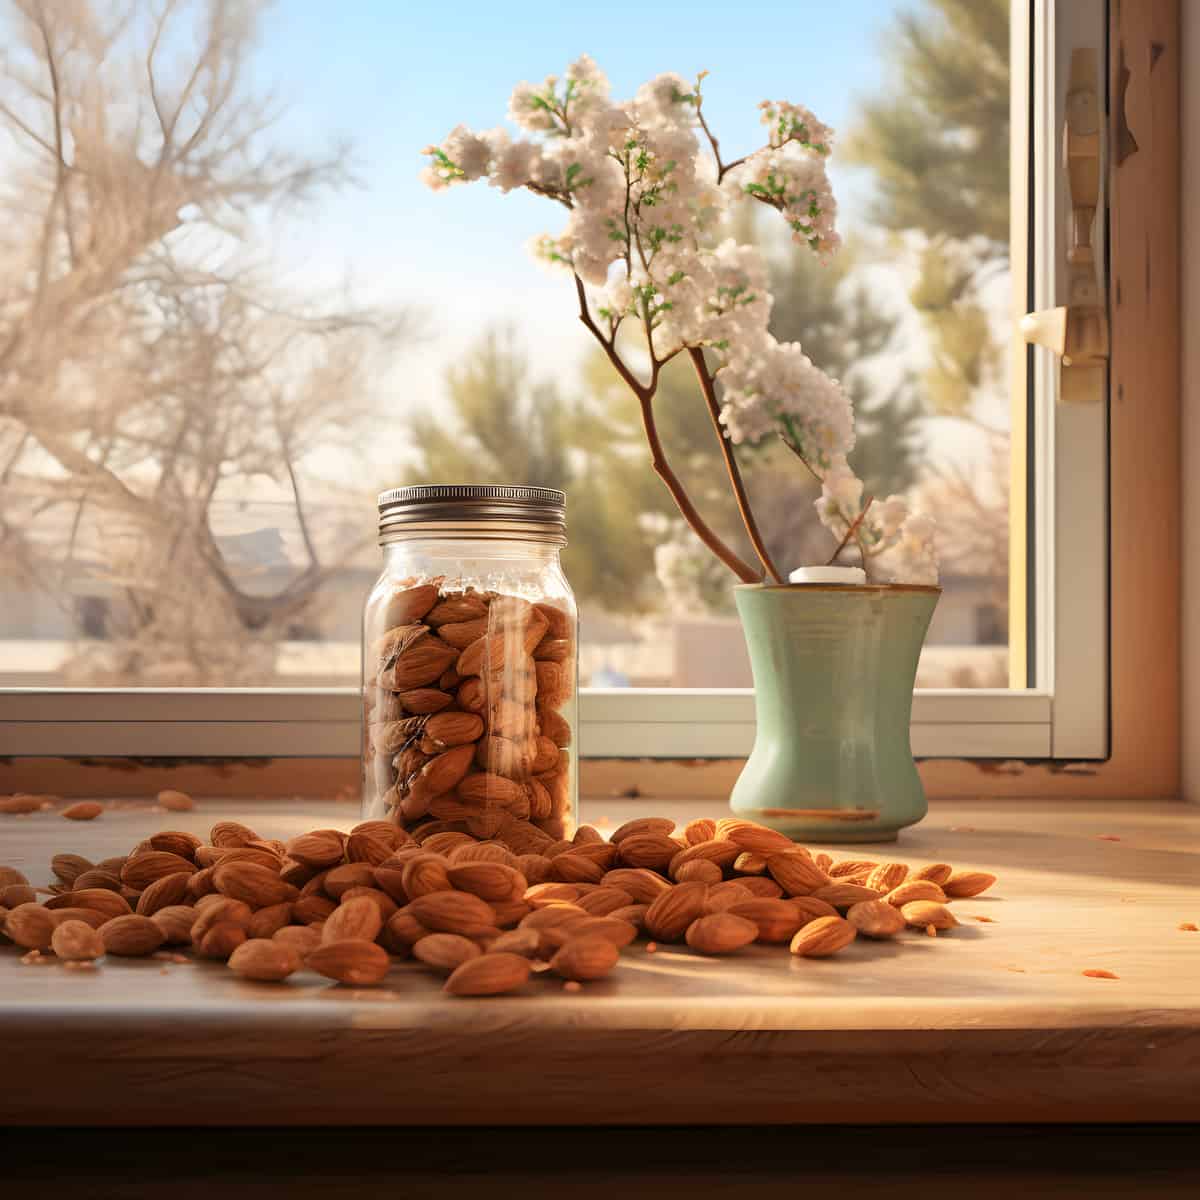 Countryalmond on a kitchen counter